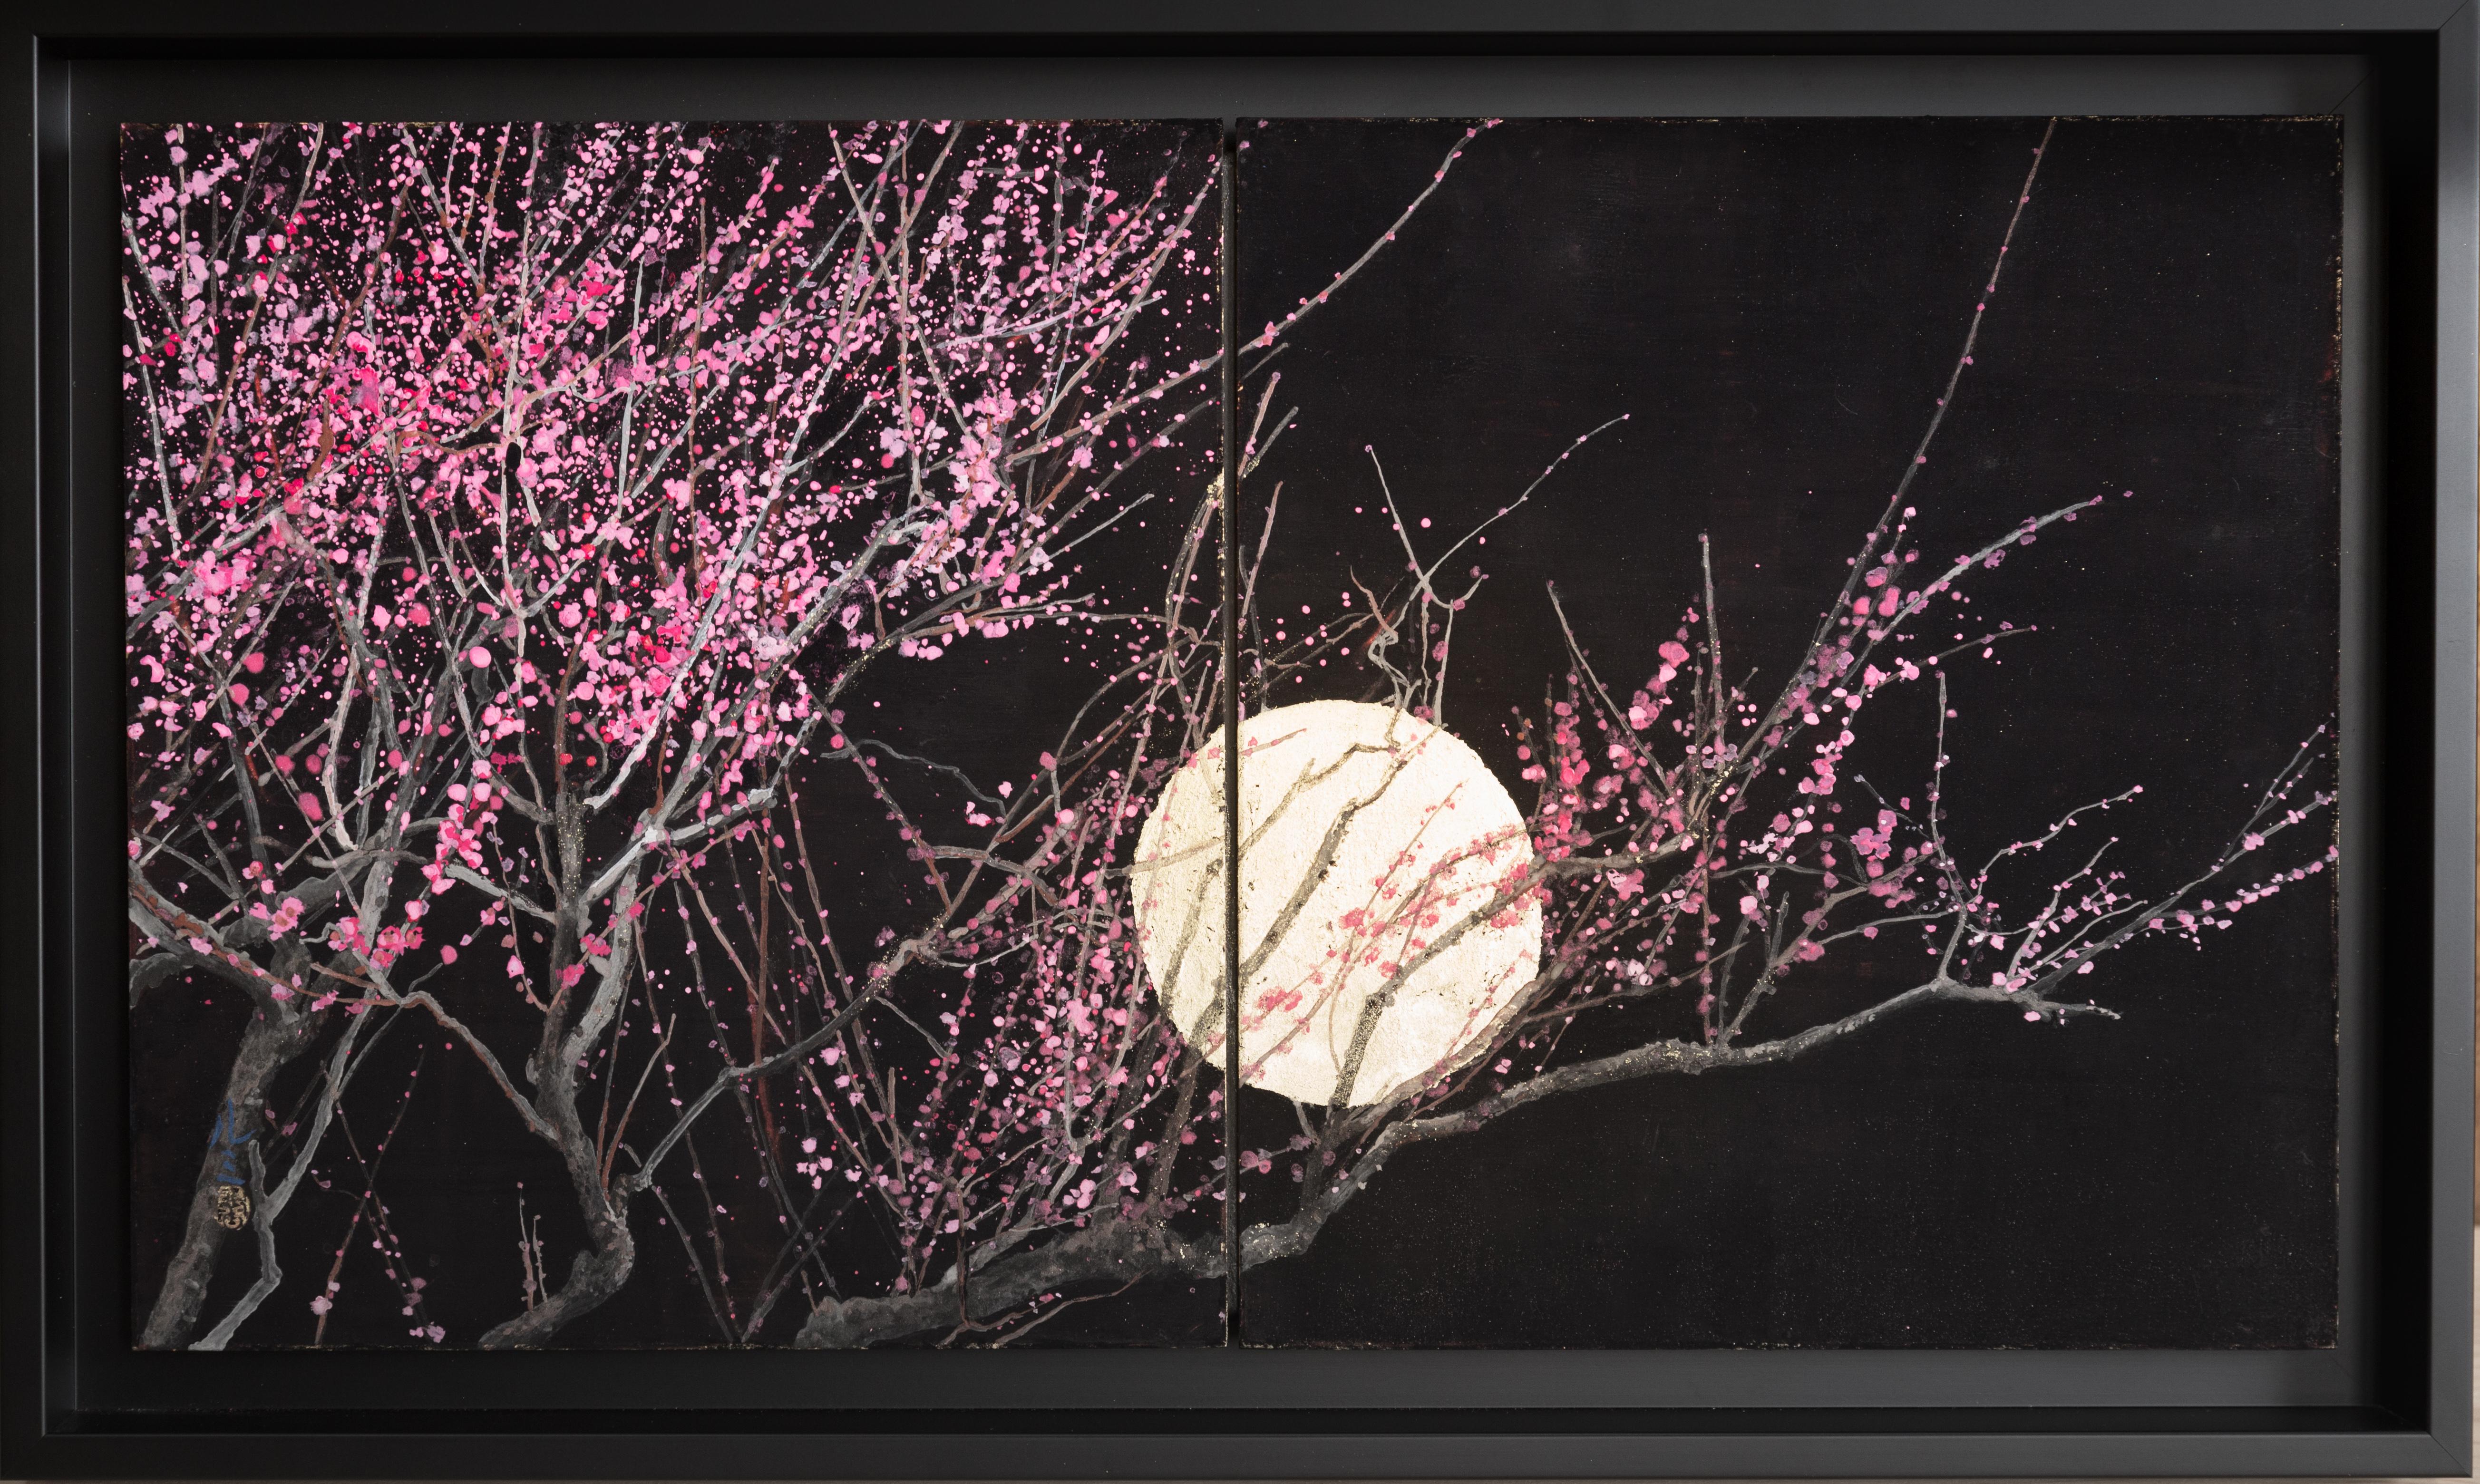 This work represents a beautiful pink tree in the moonlight. It is a celebration of love, tenderness and passion between two beings. It could therefore be the ideal romantic gift to express your feelings to your loved one on Valentine's Day, whether